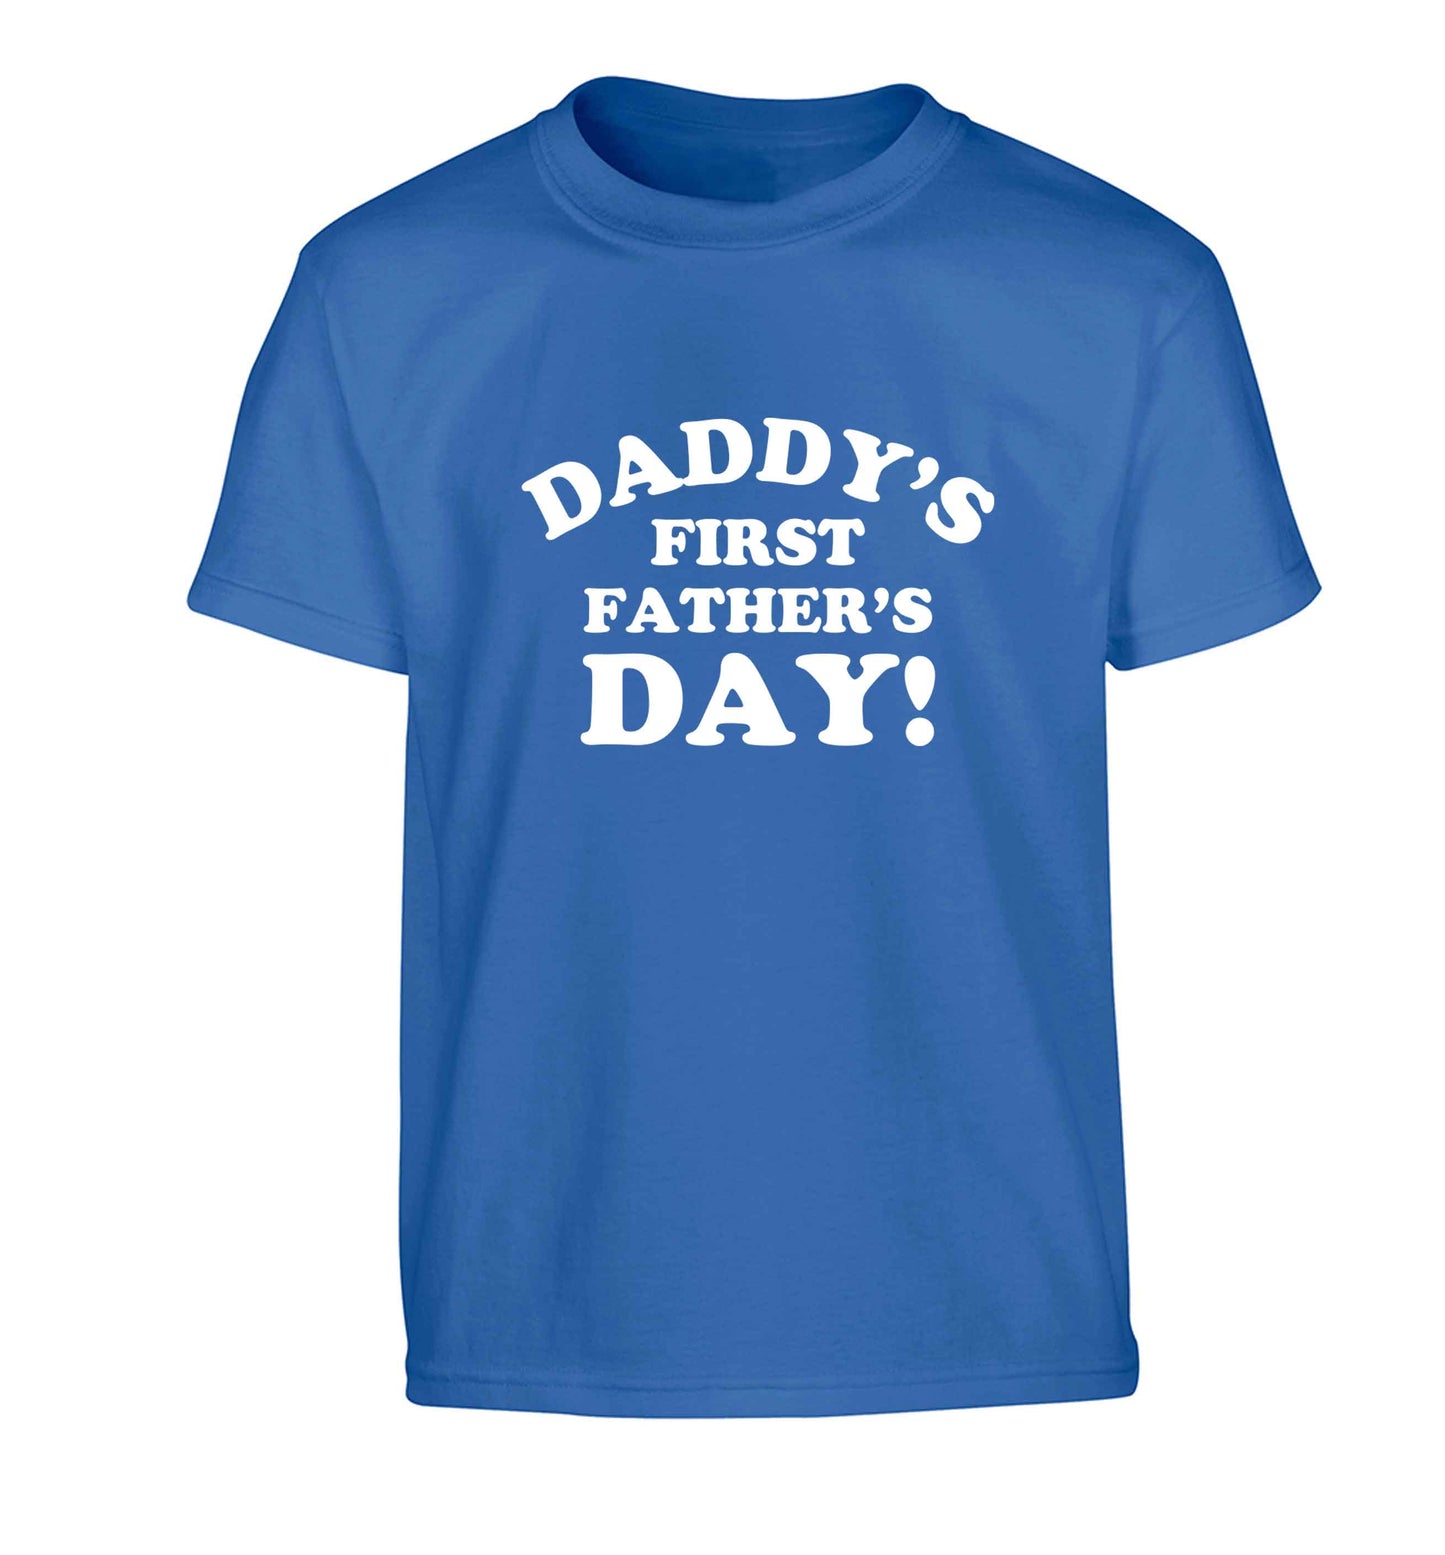 Daddy's first father's day Children's blue Tshirt 12-13 Years